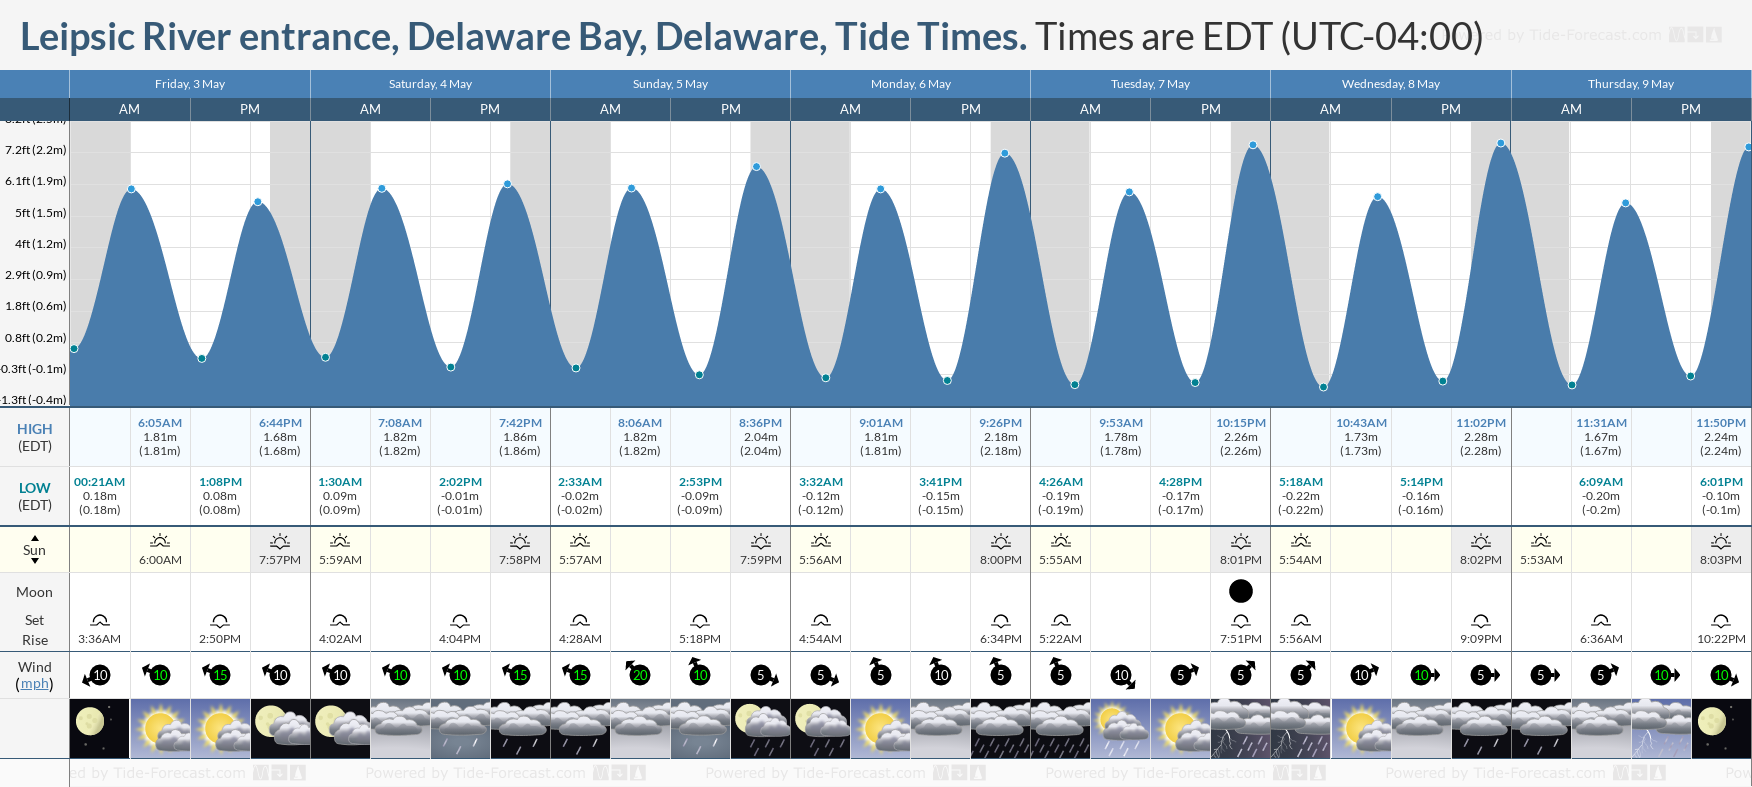 Leipsic River entrance, Delaware Bay, Delaware Tide Chart including high and low tide tide times for the next 7 days